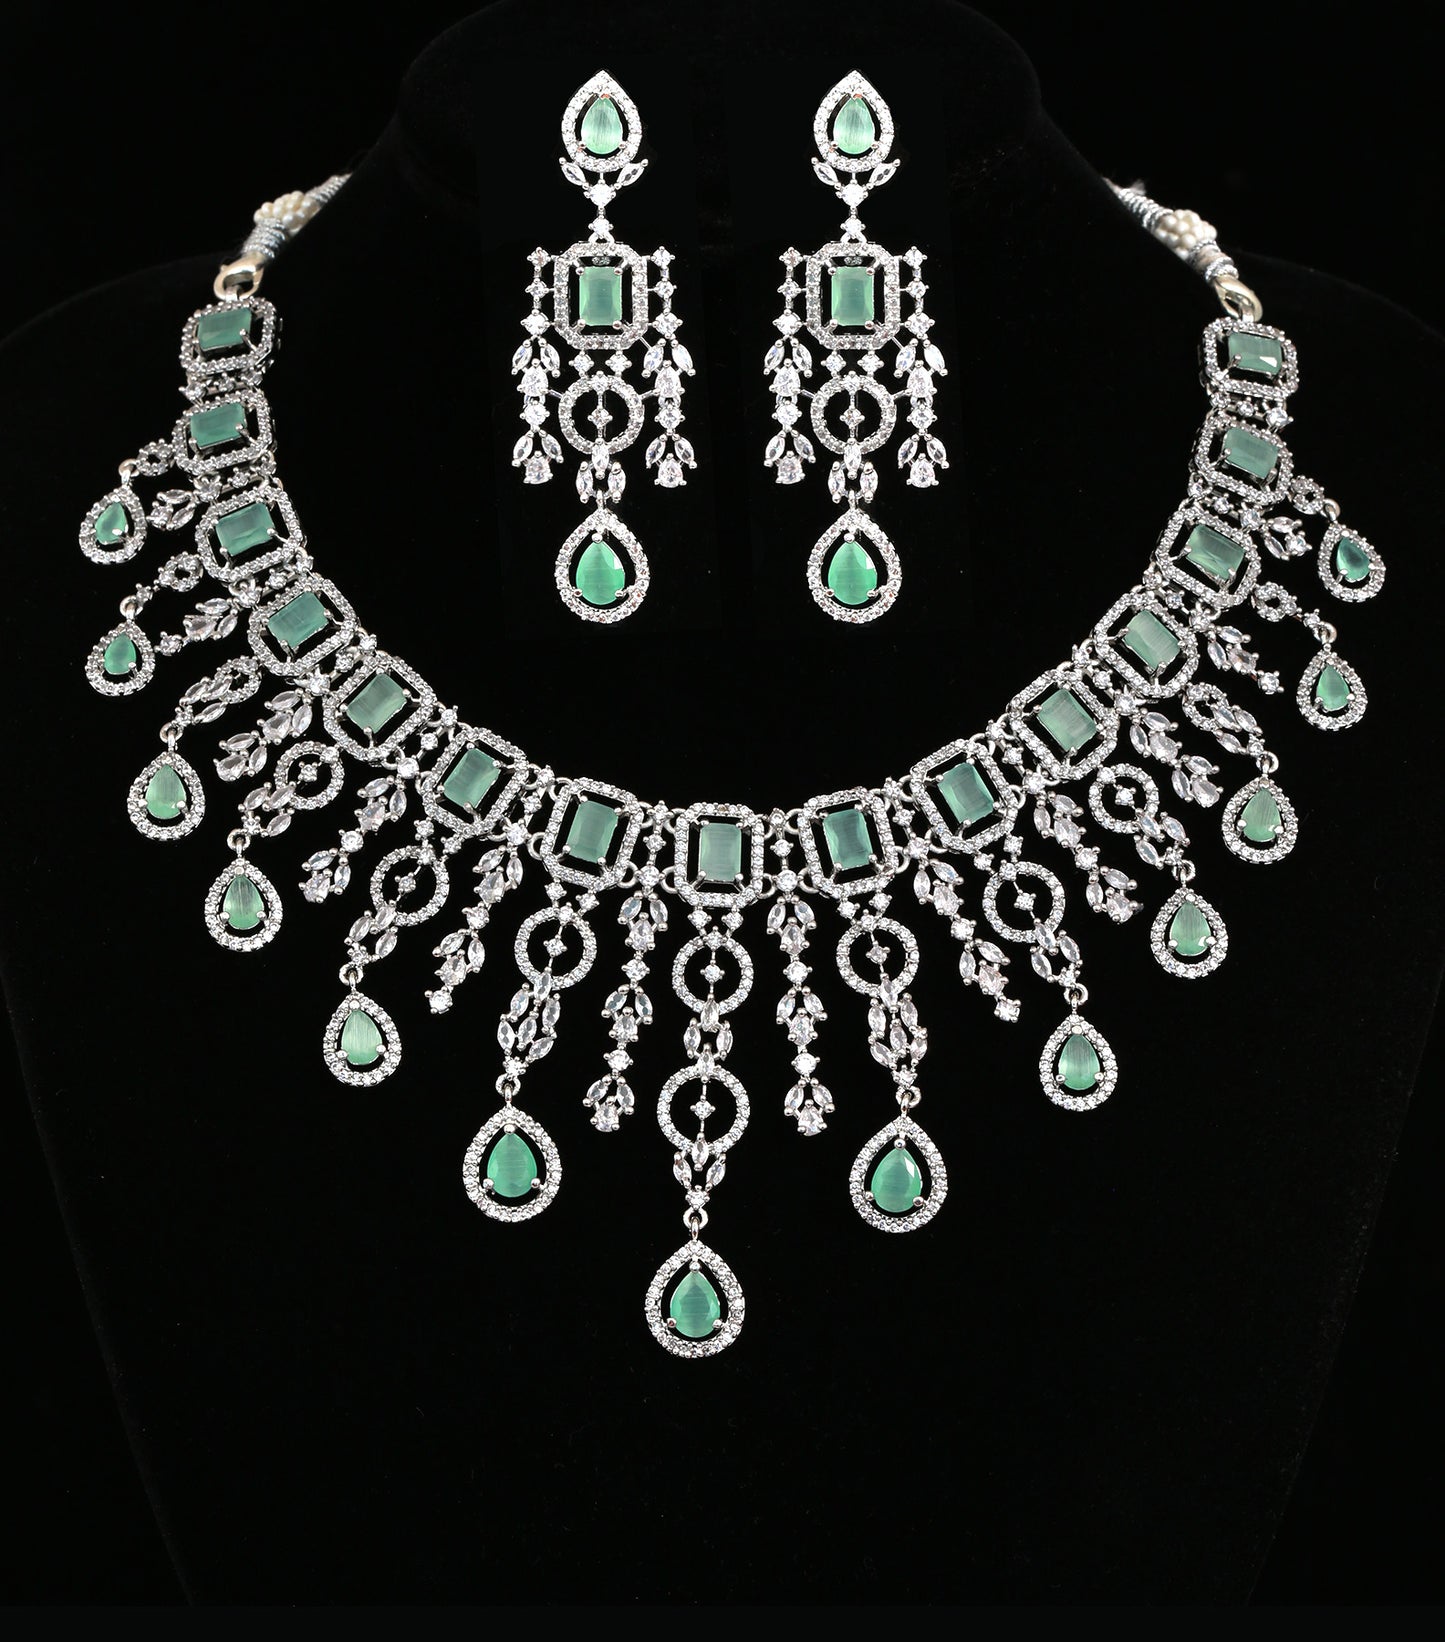 American Diamond Silver Wedding Necklace Earring set | Pink CZ Stone Indian Jewelry | Mint Green Statement Necklace | Indian Designs Jewelry